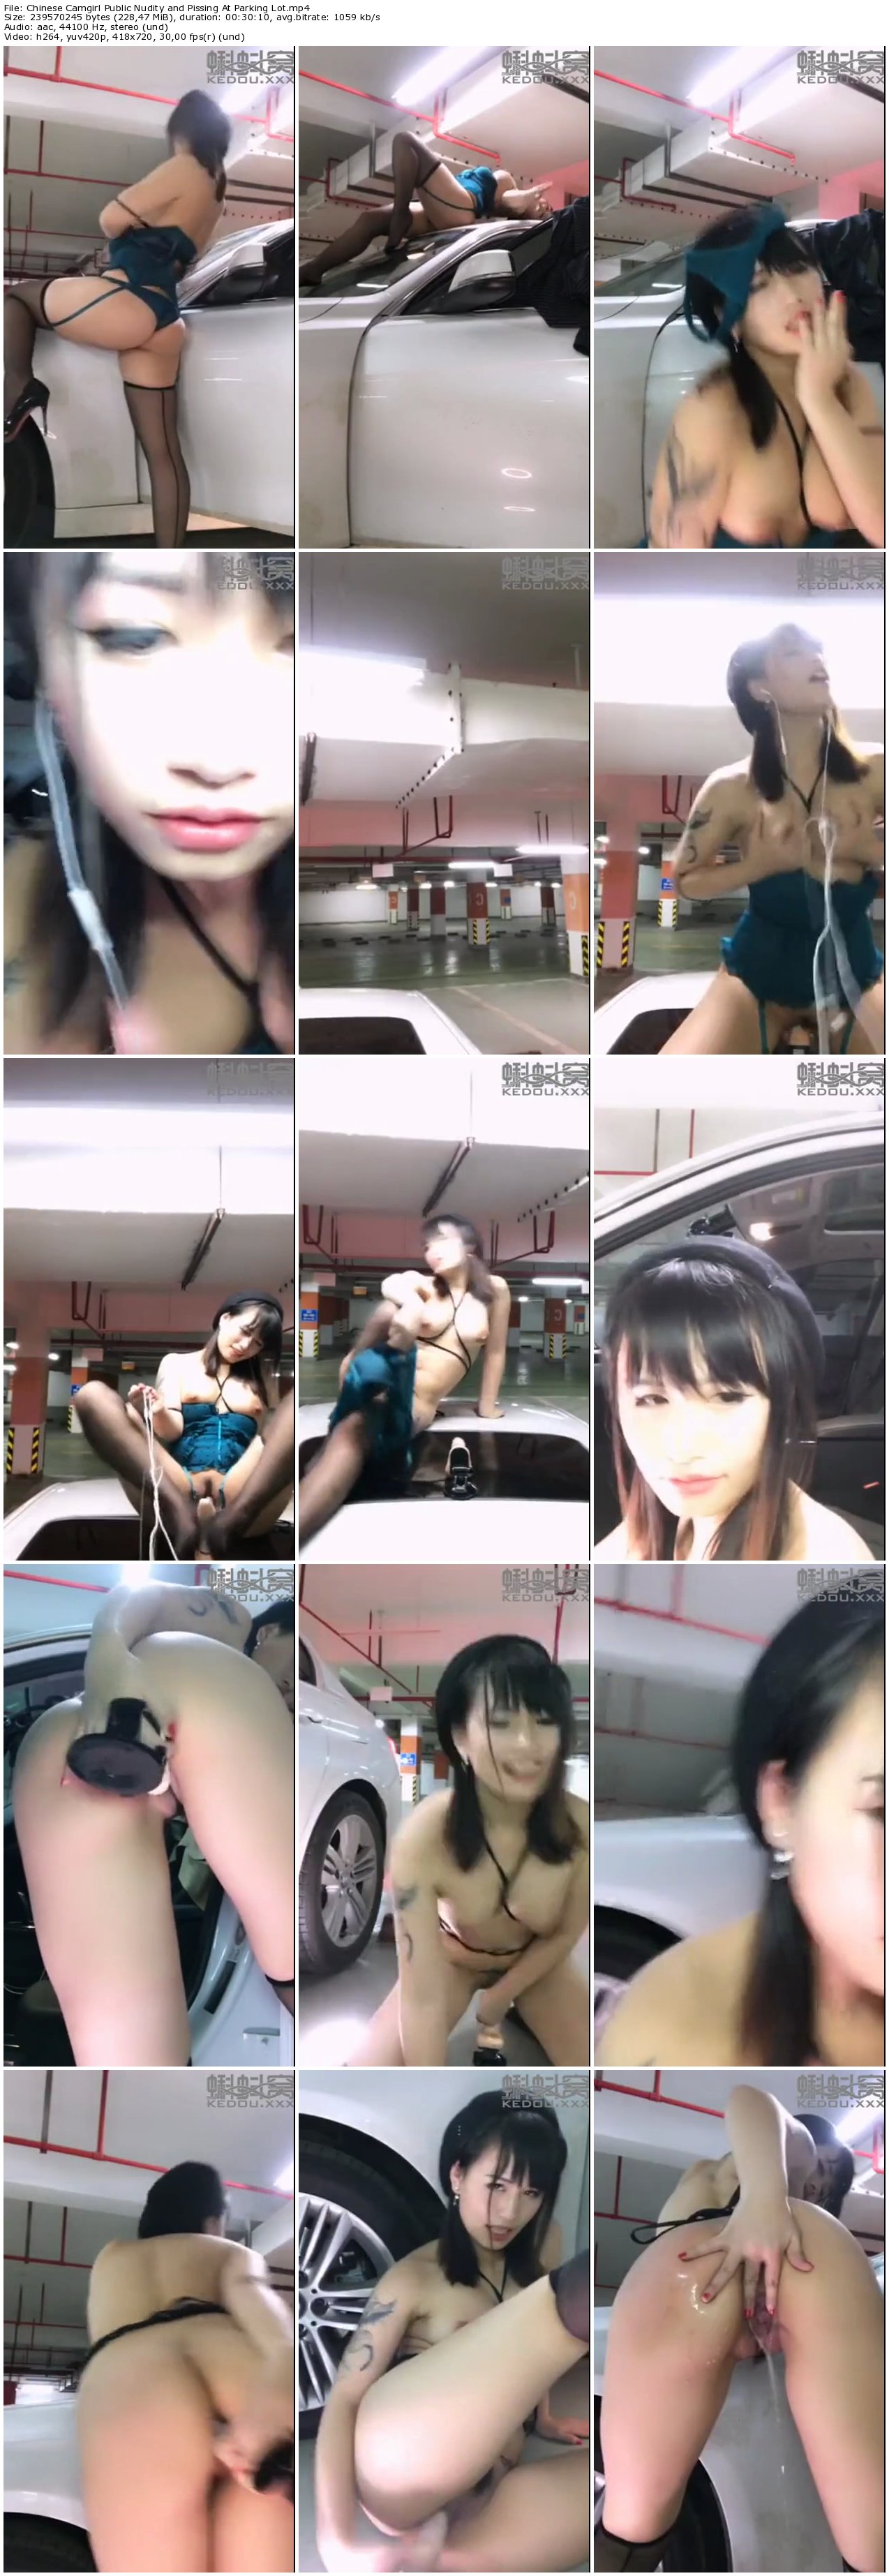 Chinese Camgirl Public Nudity and Pissing At Parking Lot_thumb.jpg